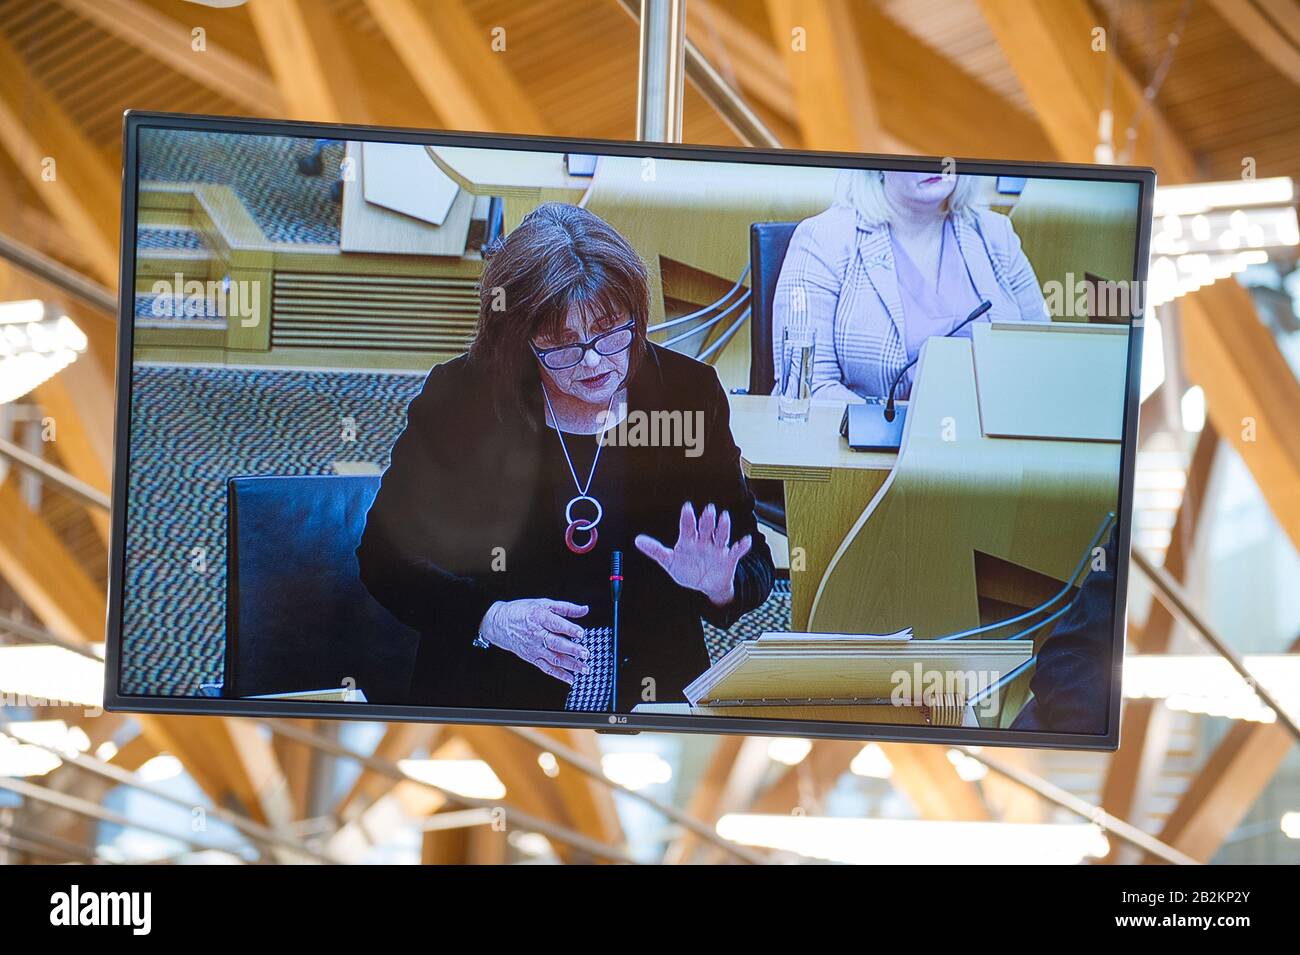 Edinburgh, UK. 3rd Mar, 2020. Pictured: Jeane Freeman MSP - Cabinet Minister for Health and Sport. Ministerial Statement from Health Minister, Jeane Freeman MSP on the state of Coronovirus and Scotland's readiness to to mitigate the spread of the virus across Scotland. Scenes from the Scottish Parliament in Holyrood, Edinburgh. Credit: Colin Fisher/Alamy Live News Stock Photo